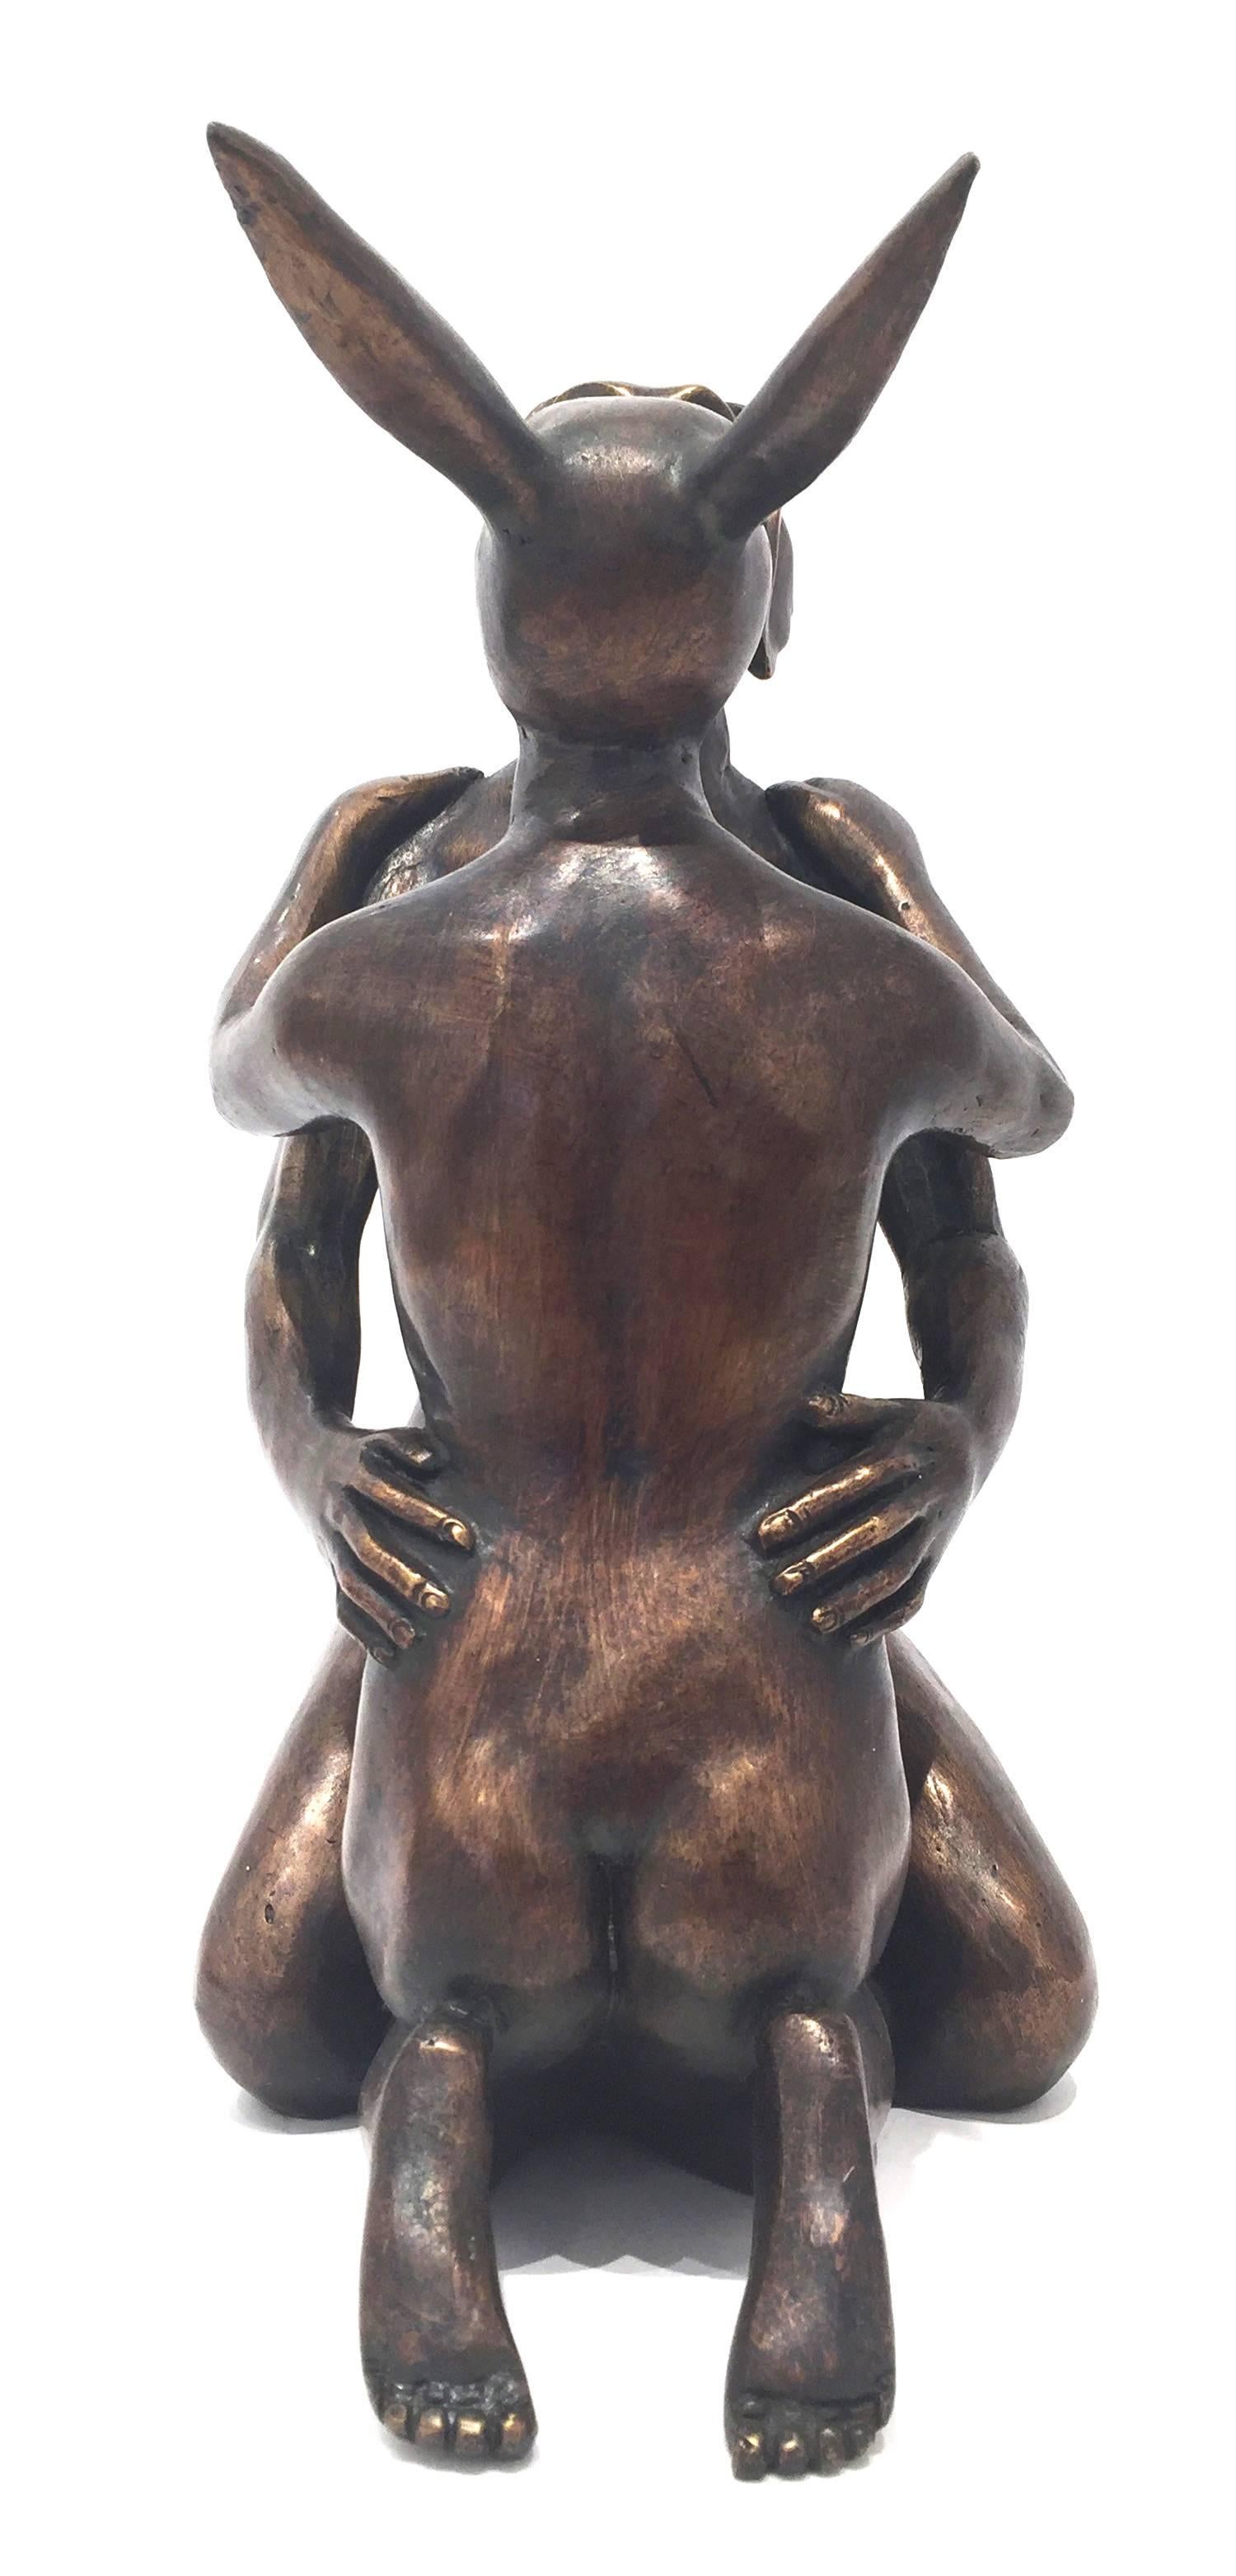 She hoped this Kiss would Last Forever (Weim and Rabbit) - Gold Figurative Sculpture by Gillie and Marc Schattner